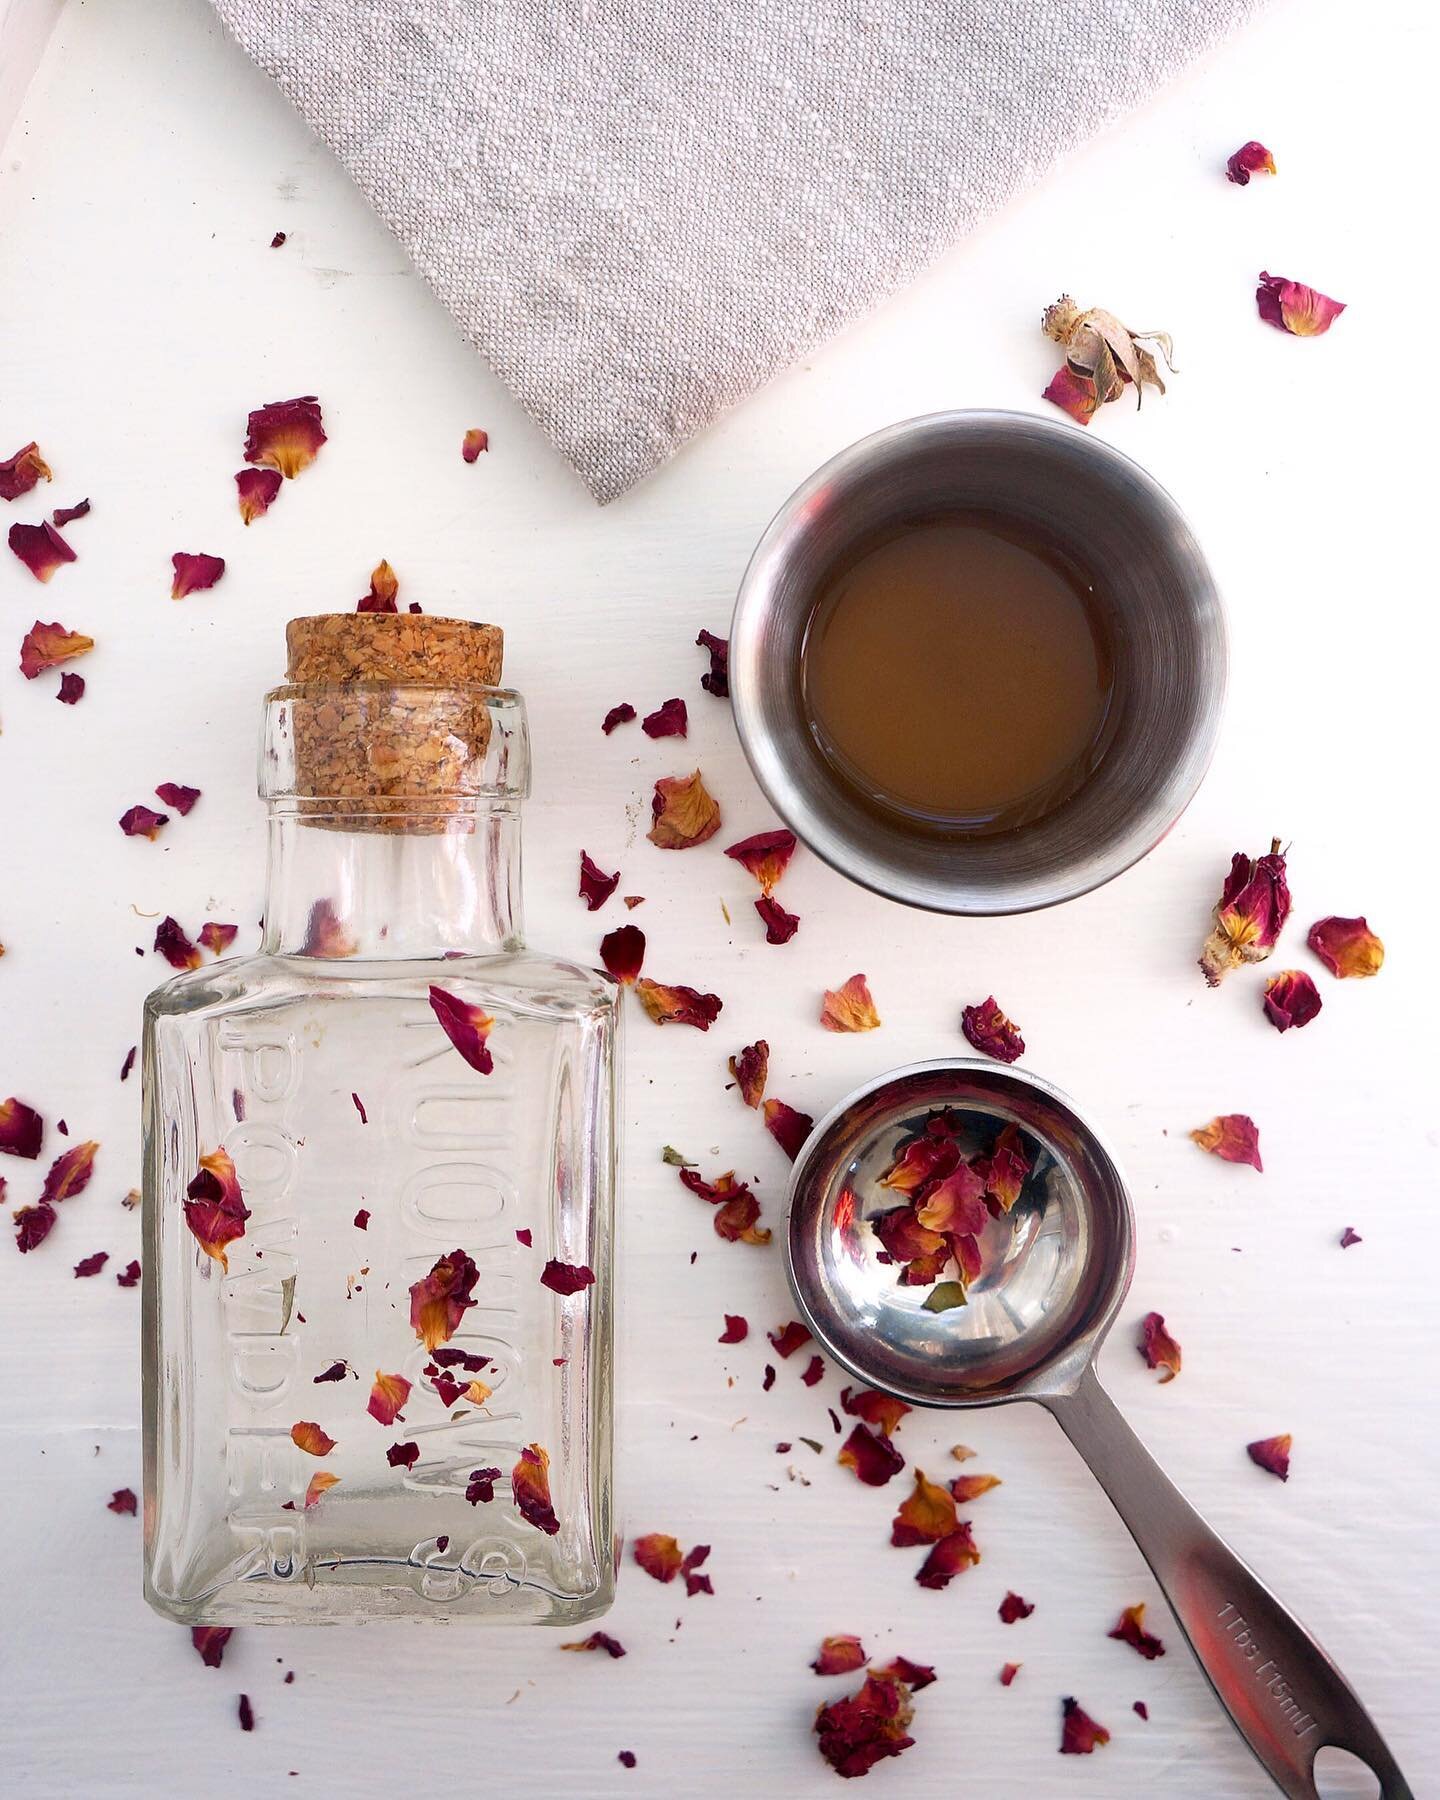 New on the Journal: DIY Apple Cider Vinegar and Rosewater Toner Recipe.

A DIY ACV Toner was one of the first at-home recipes I remember making that moved the needle in healing my adult acne. The downside? I smelled like vinegar! Enter: Rosewater and